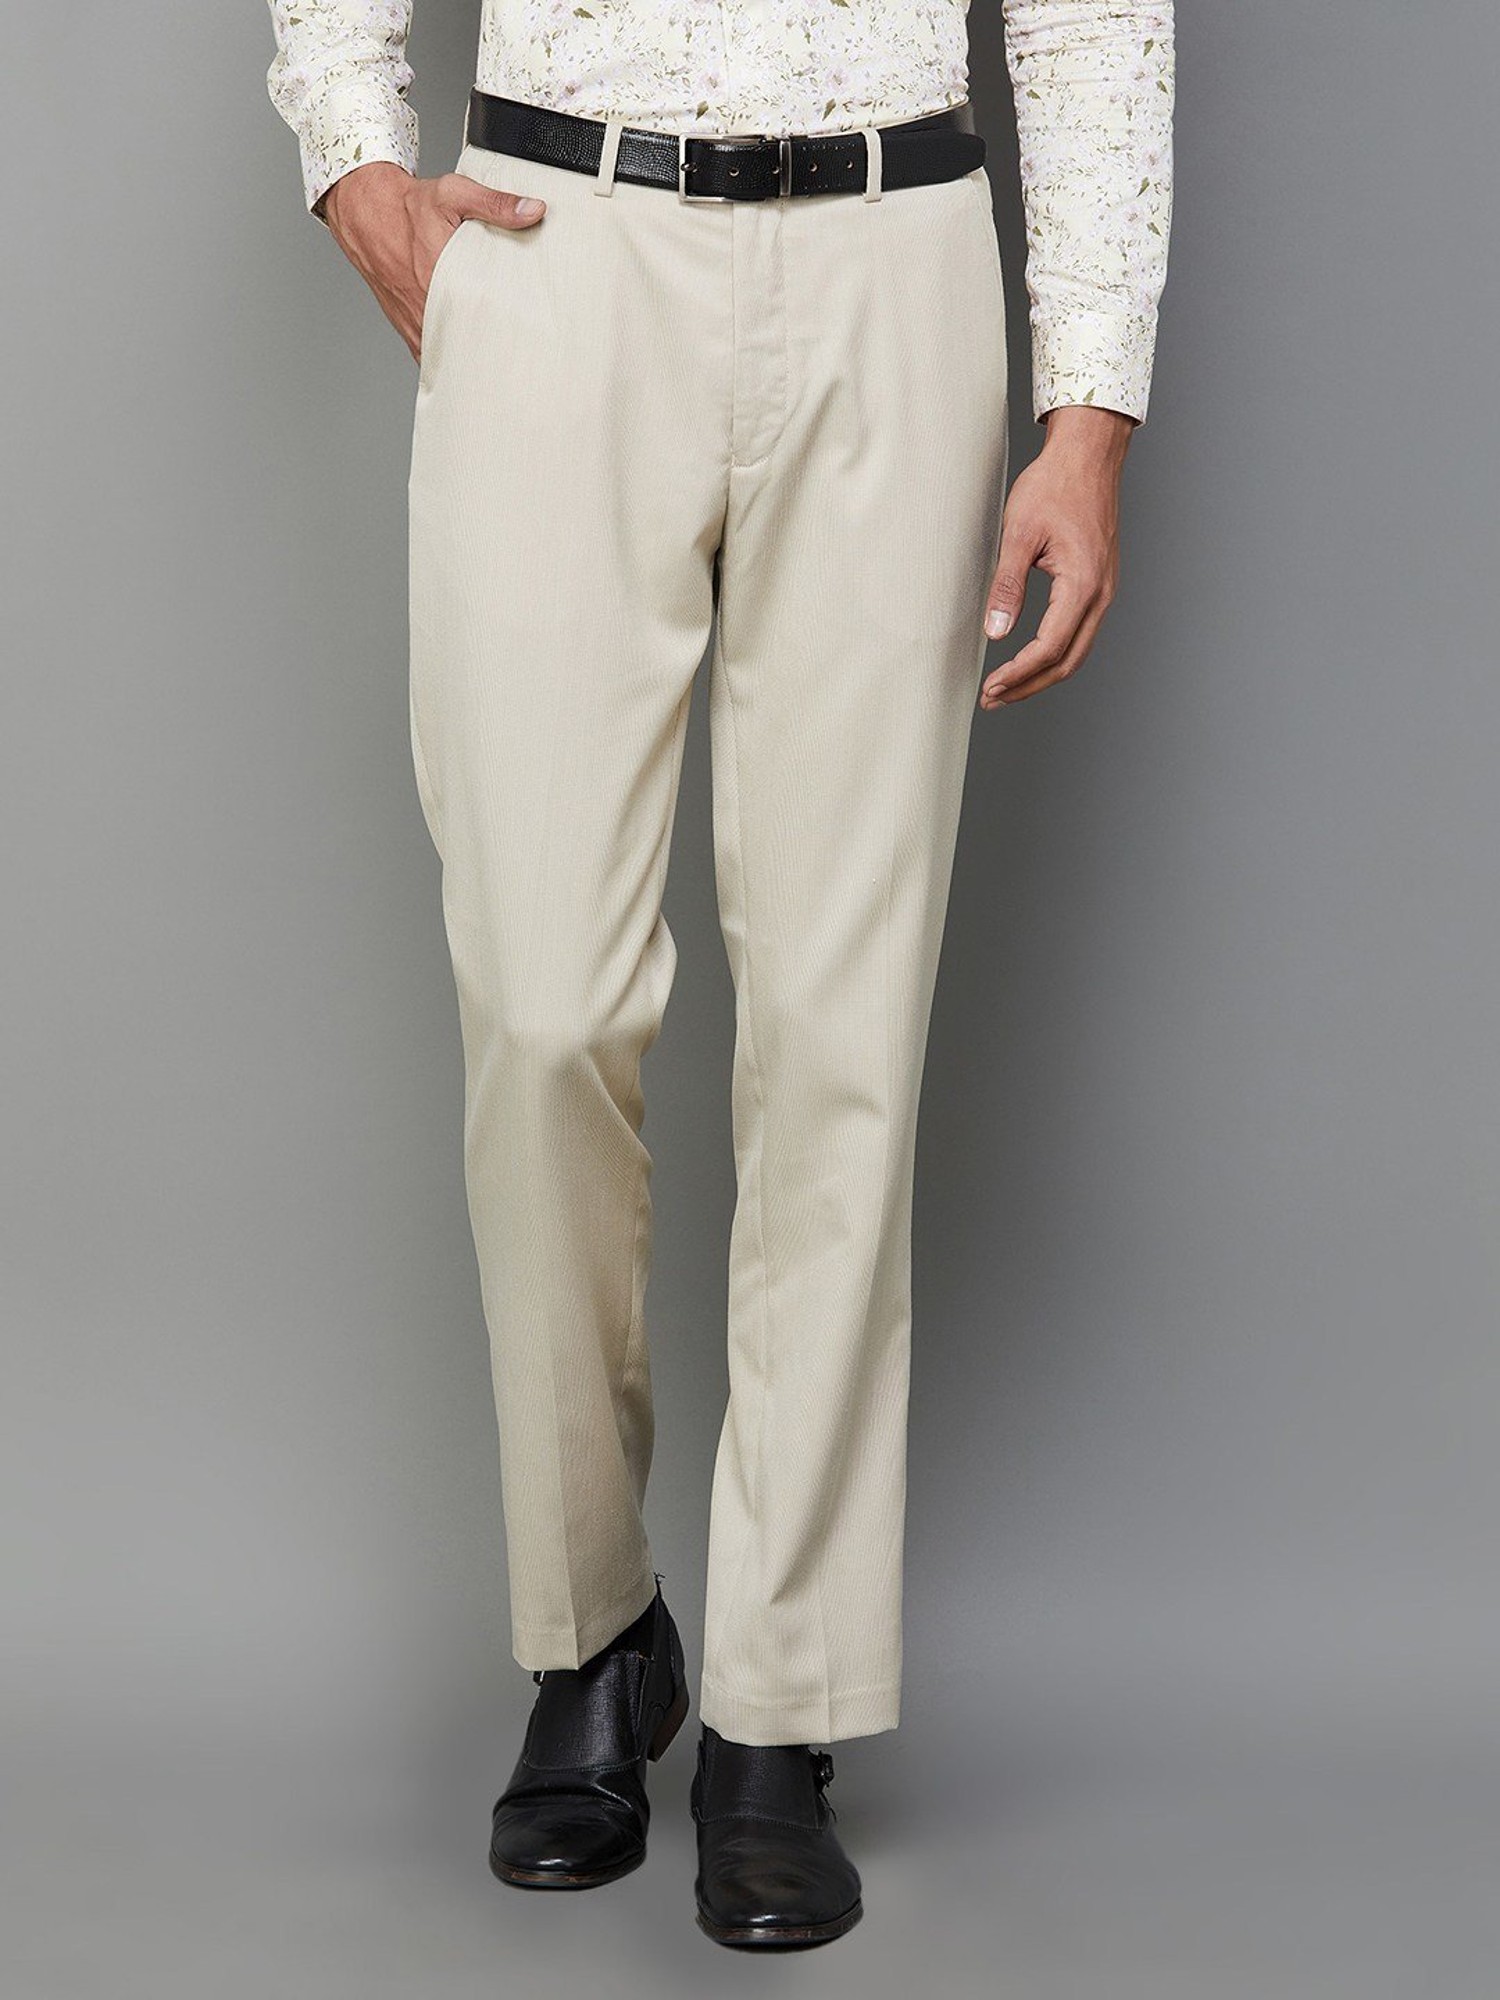 Red Cherry Flexi Wasit-Ankle Length Cream Lycra Slim Fit Men Cream Trousers  - Buy Red Cherry Flexi Wasit-Ankle Length Cream Lycra Slim Fit Men Cream  Trousers Online at Best Prices in India |